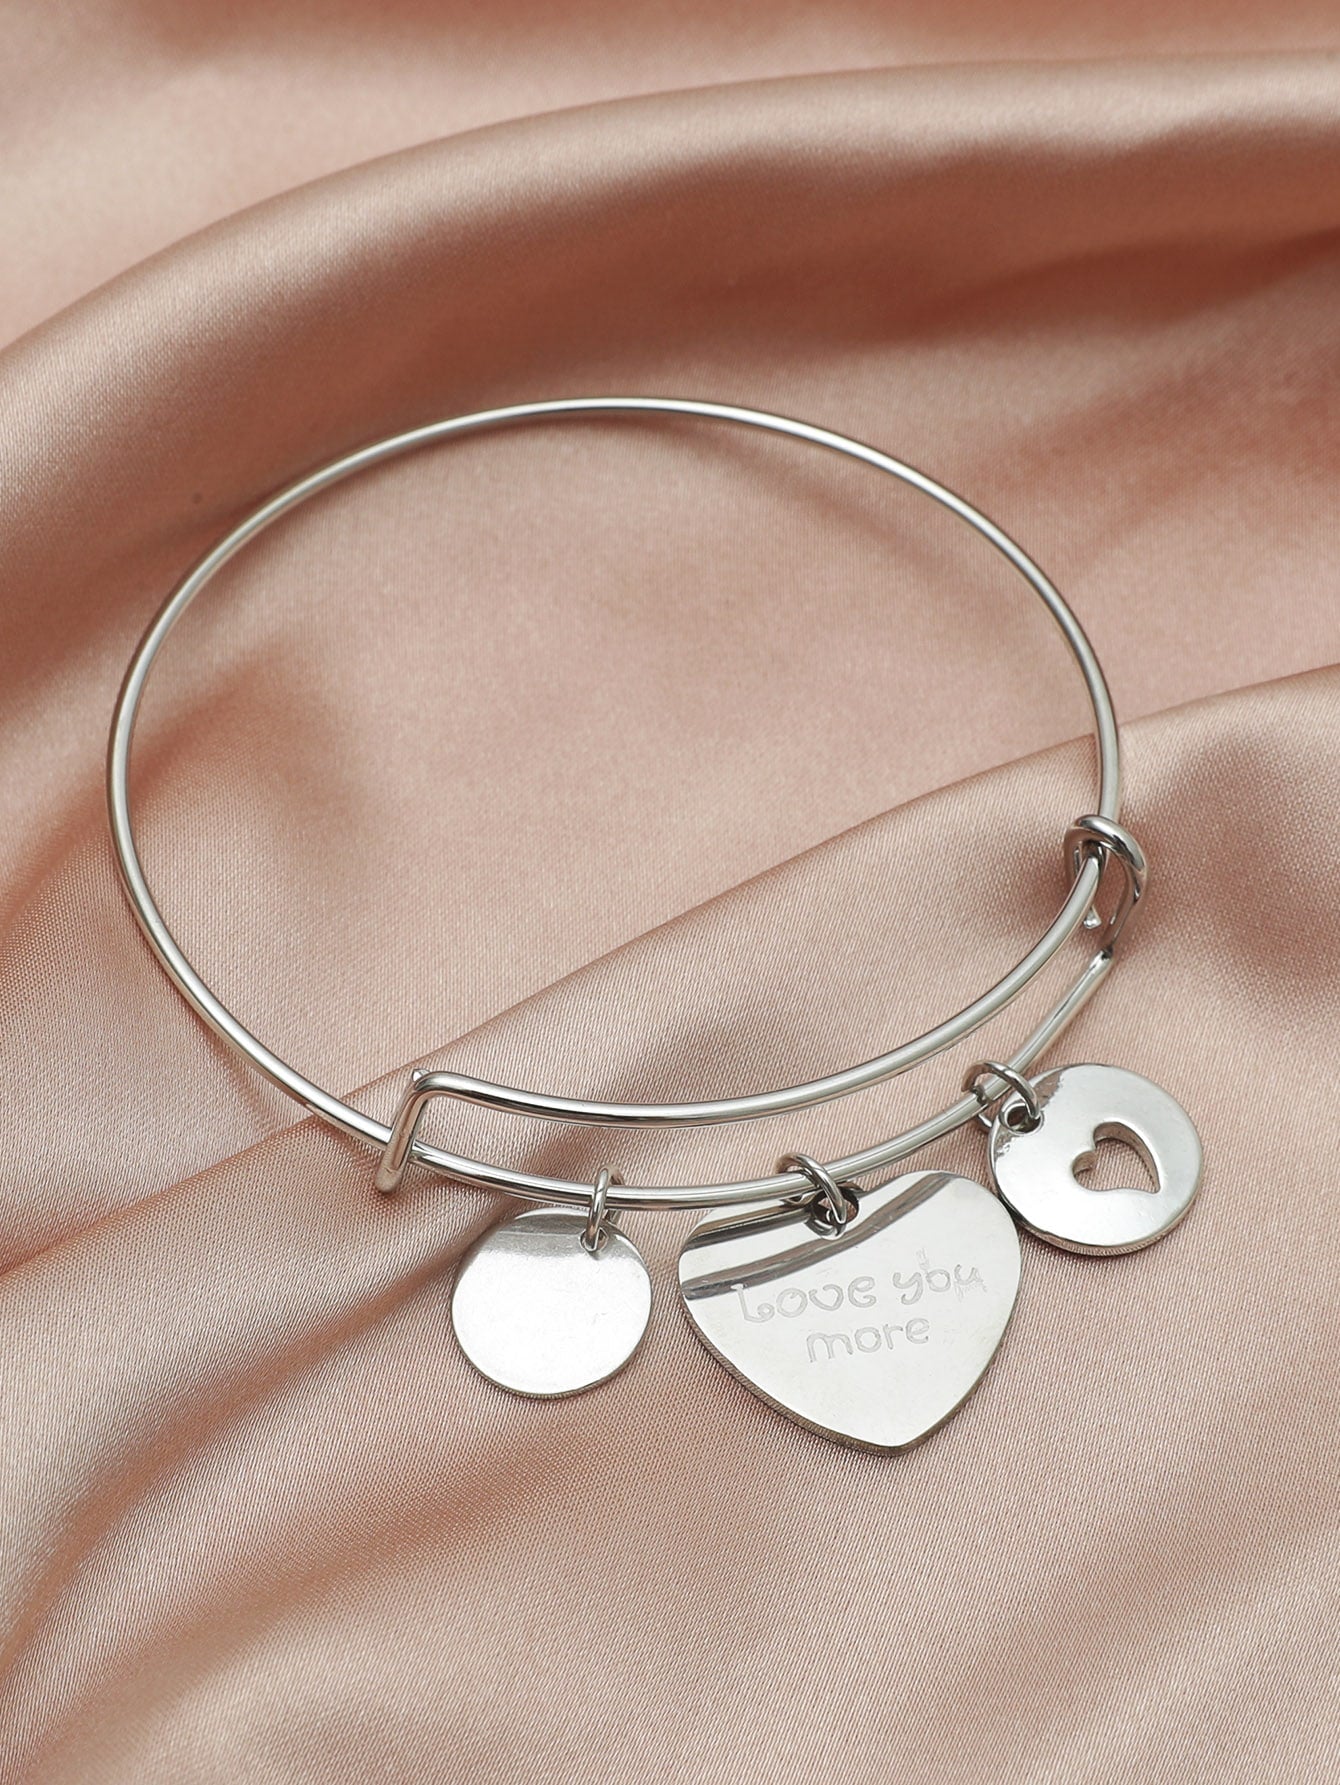 Heart Charm Bangle Bracelet for Women Jewelry Gifts for Her Fashion Accessories